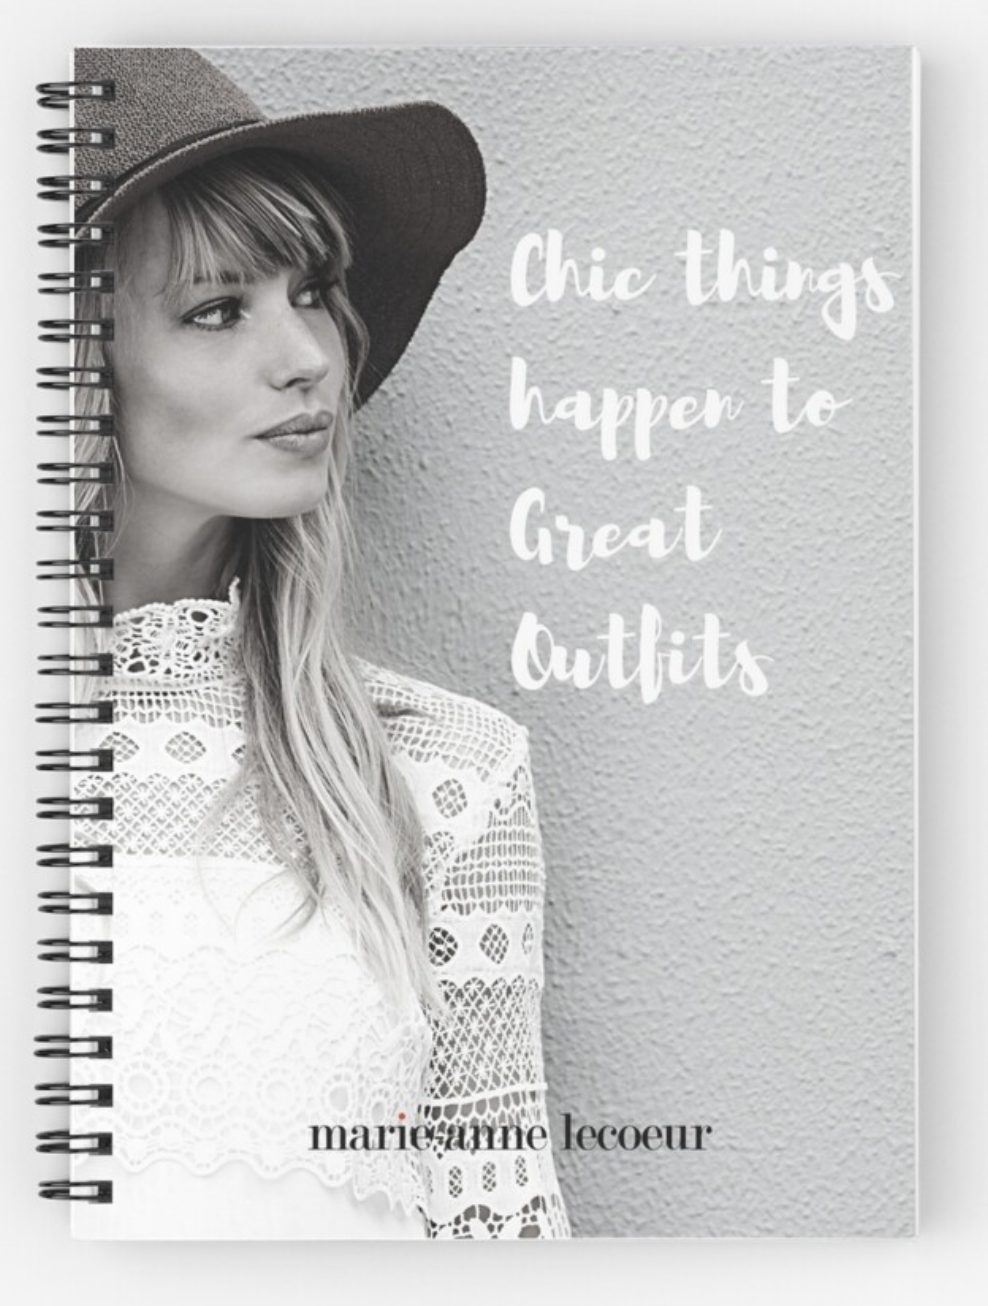 Chic Things Happen to Great Outfits Notebook